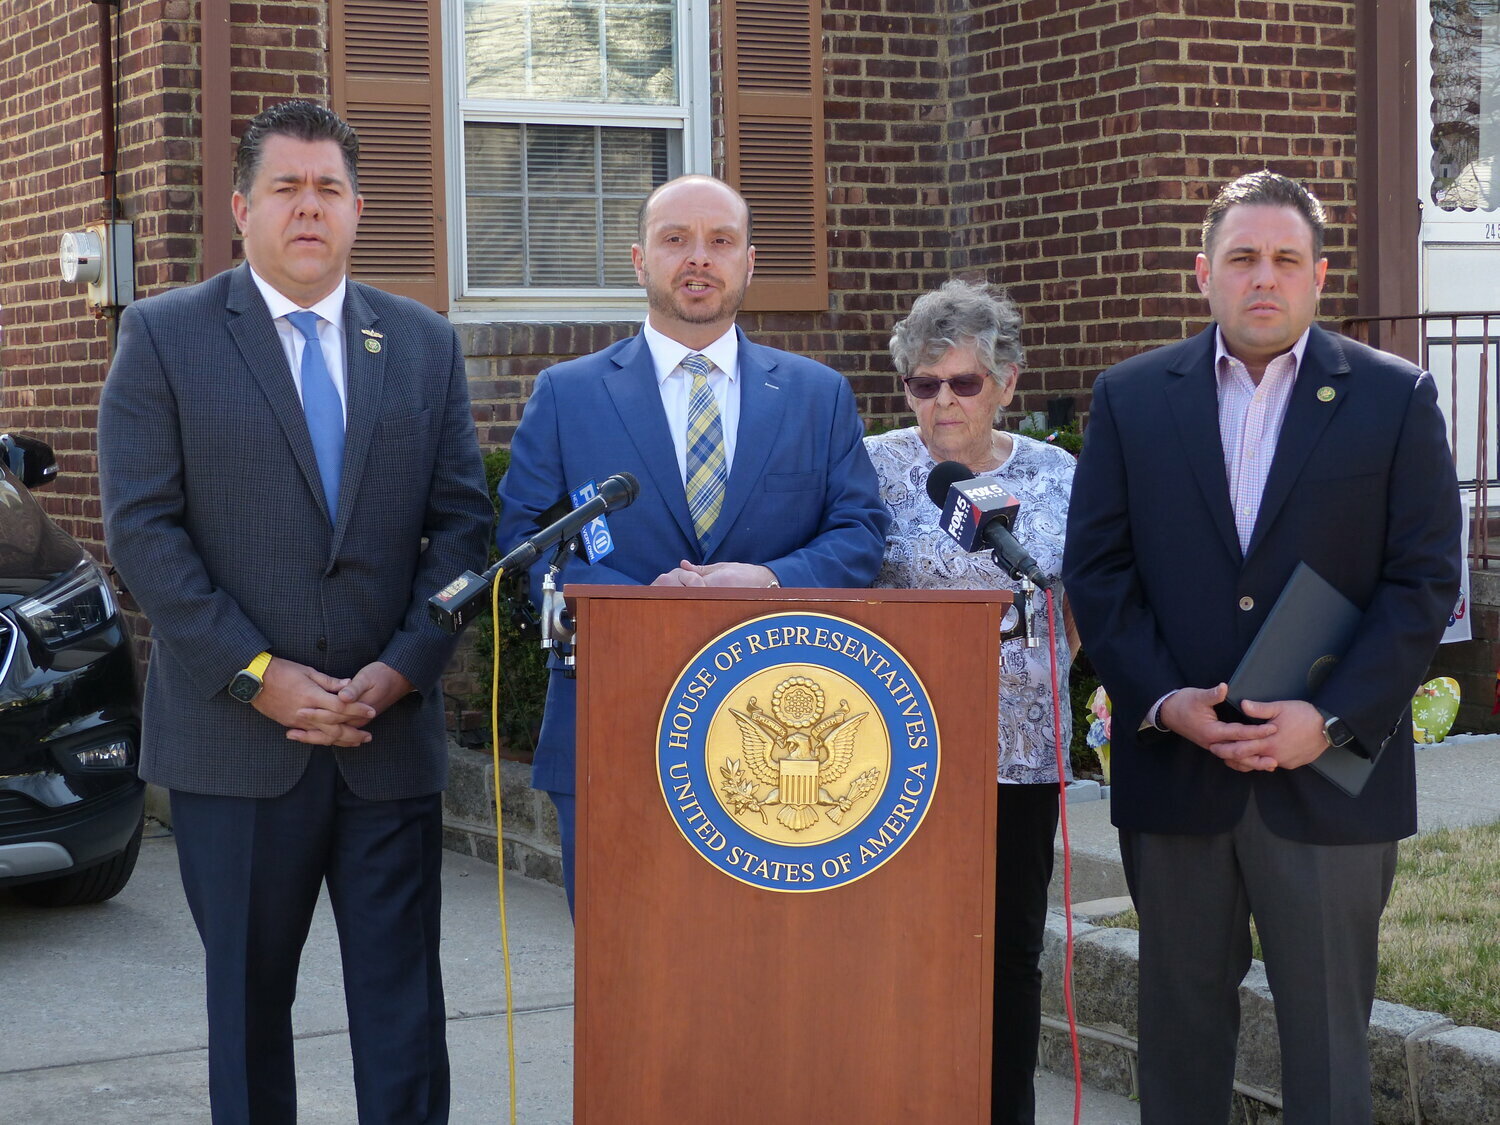 Rep. Andrew Garbarino, second from left, has introduced a bill — named for the young victim of a 2005 boating accident — aimed at boating safety education and training. His colleagues, Reps. Nick Lalota, far left, and Anthony D’Esposito, far right, have cosponsored the bill.